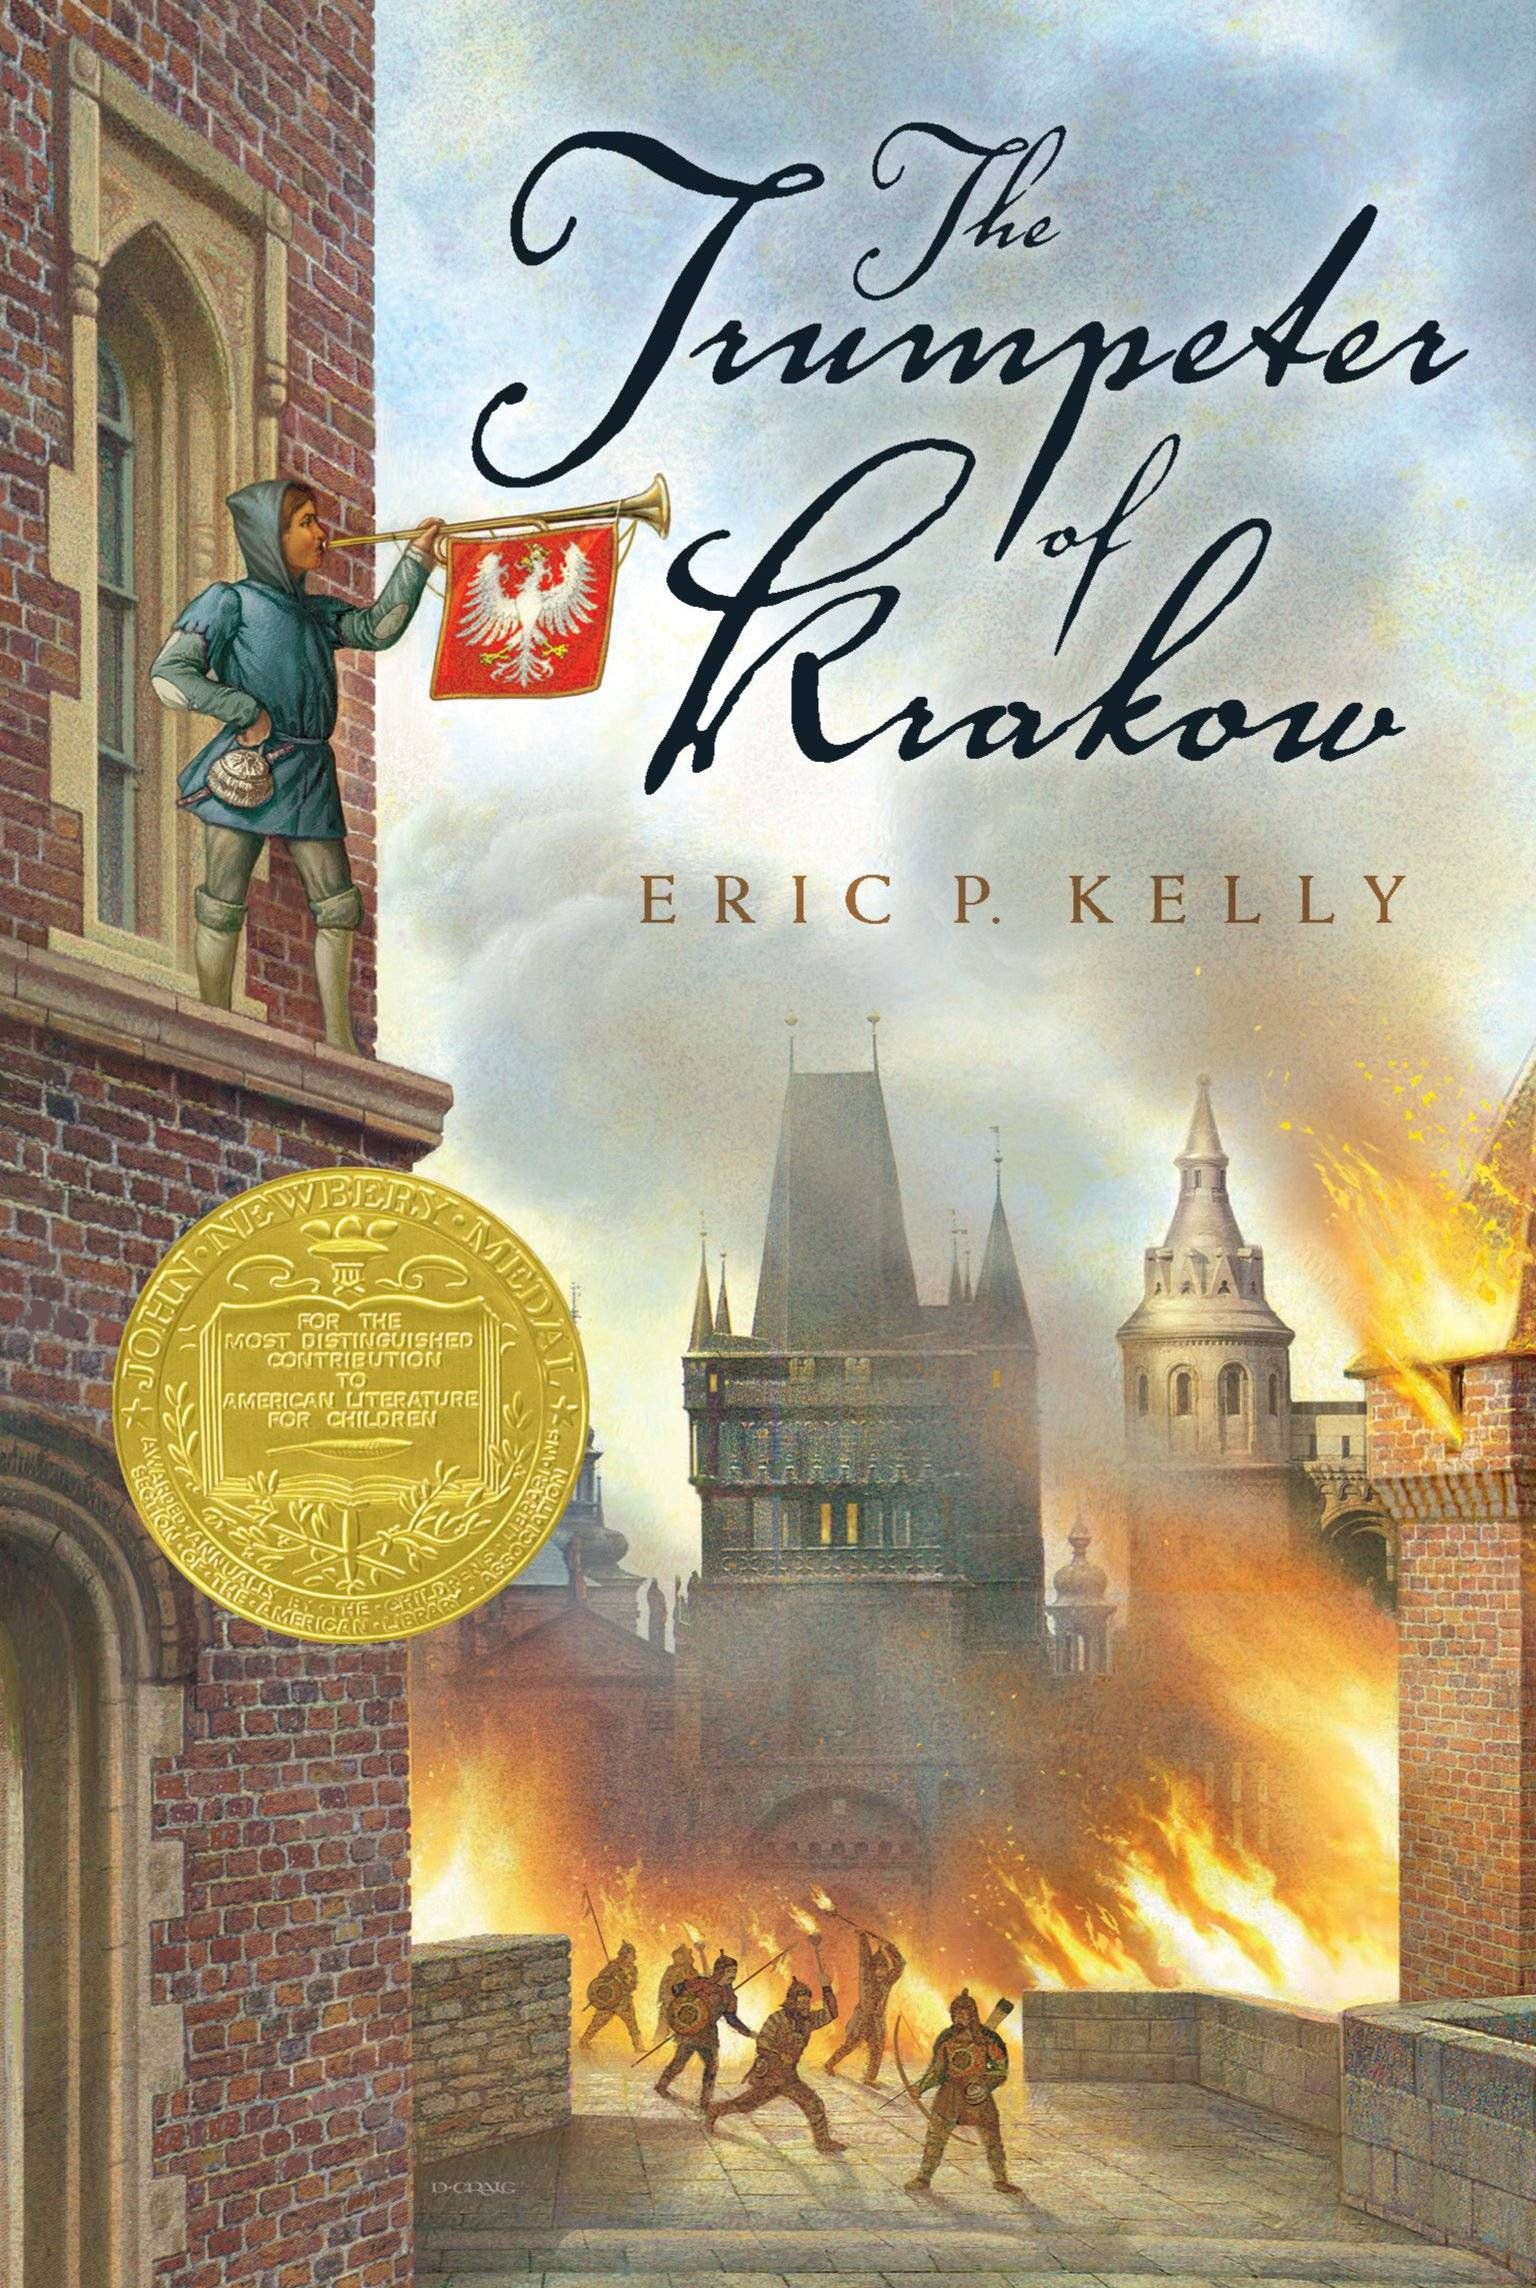 The Trumpeter of Krakow by Eric P Kelly